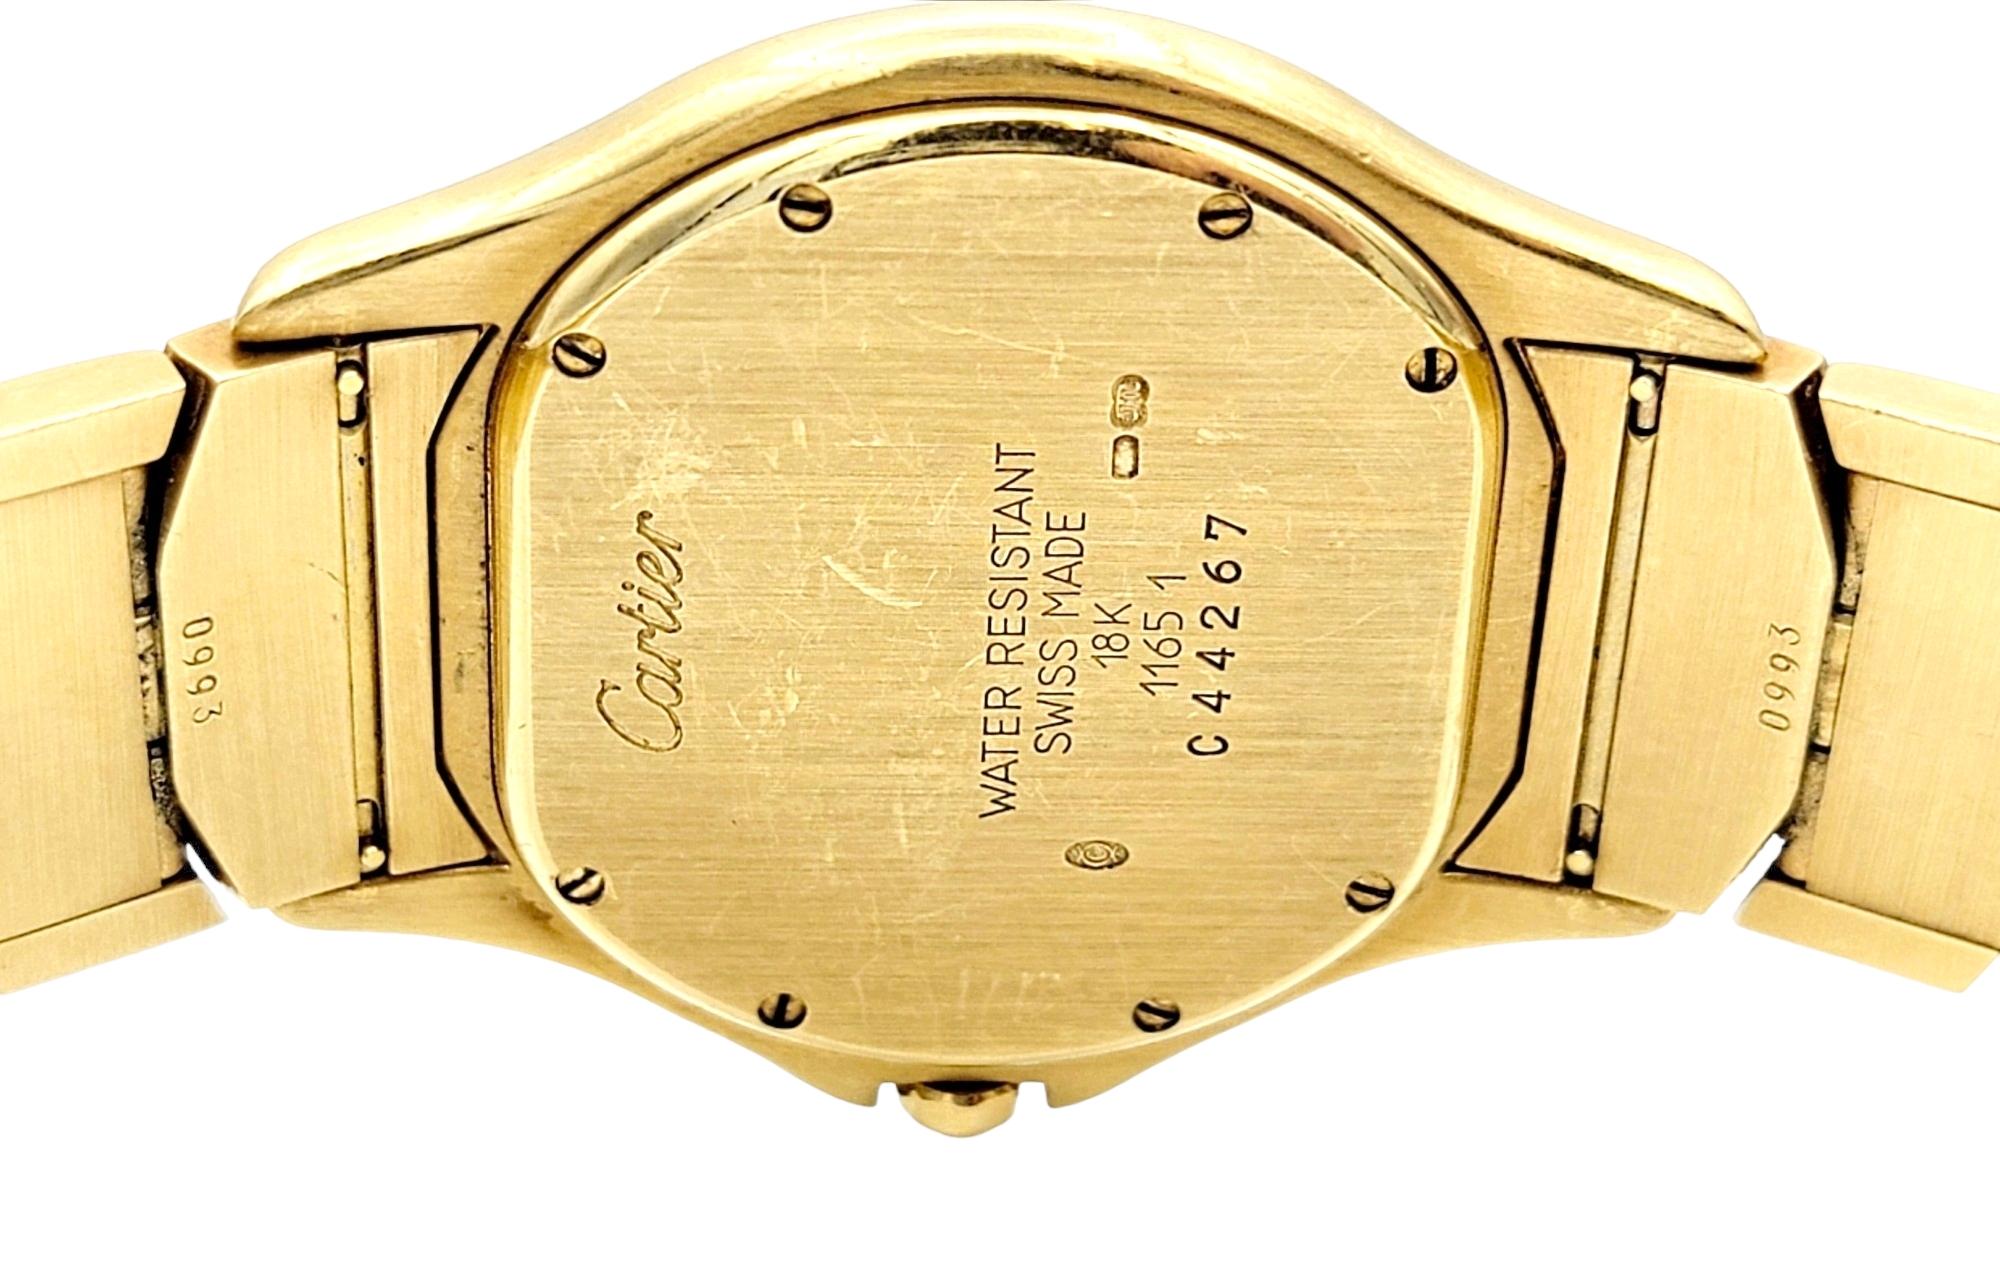 Contemporary Unisex Cartier Panthere Cougar 18 Karat Yellow Gold Wrist Watch with Diamonds  For Sale